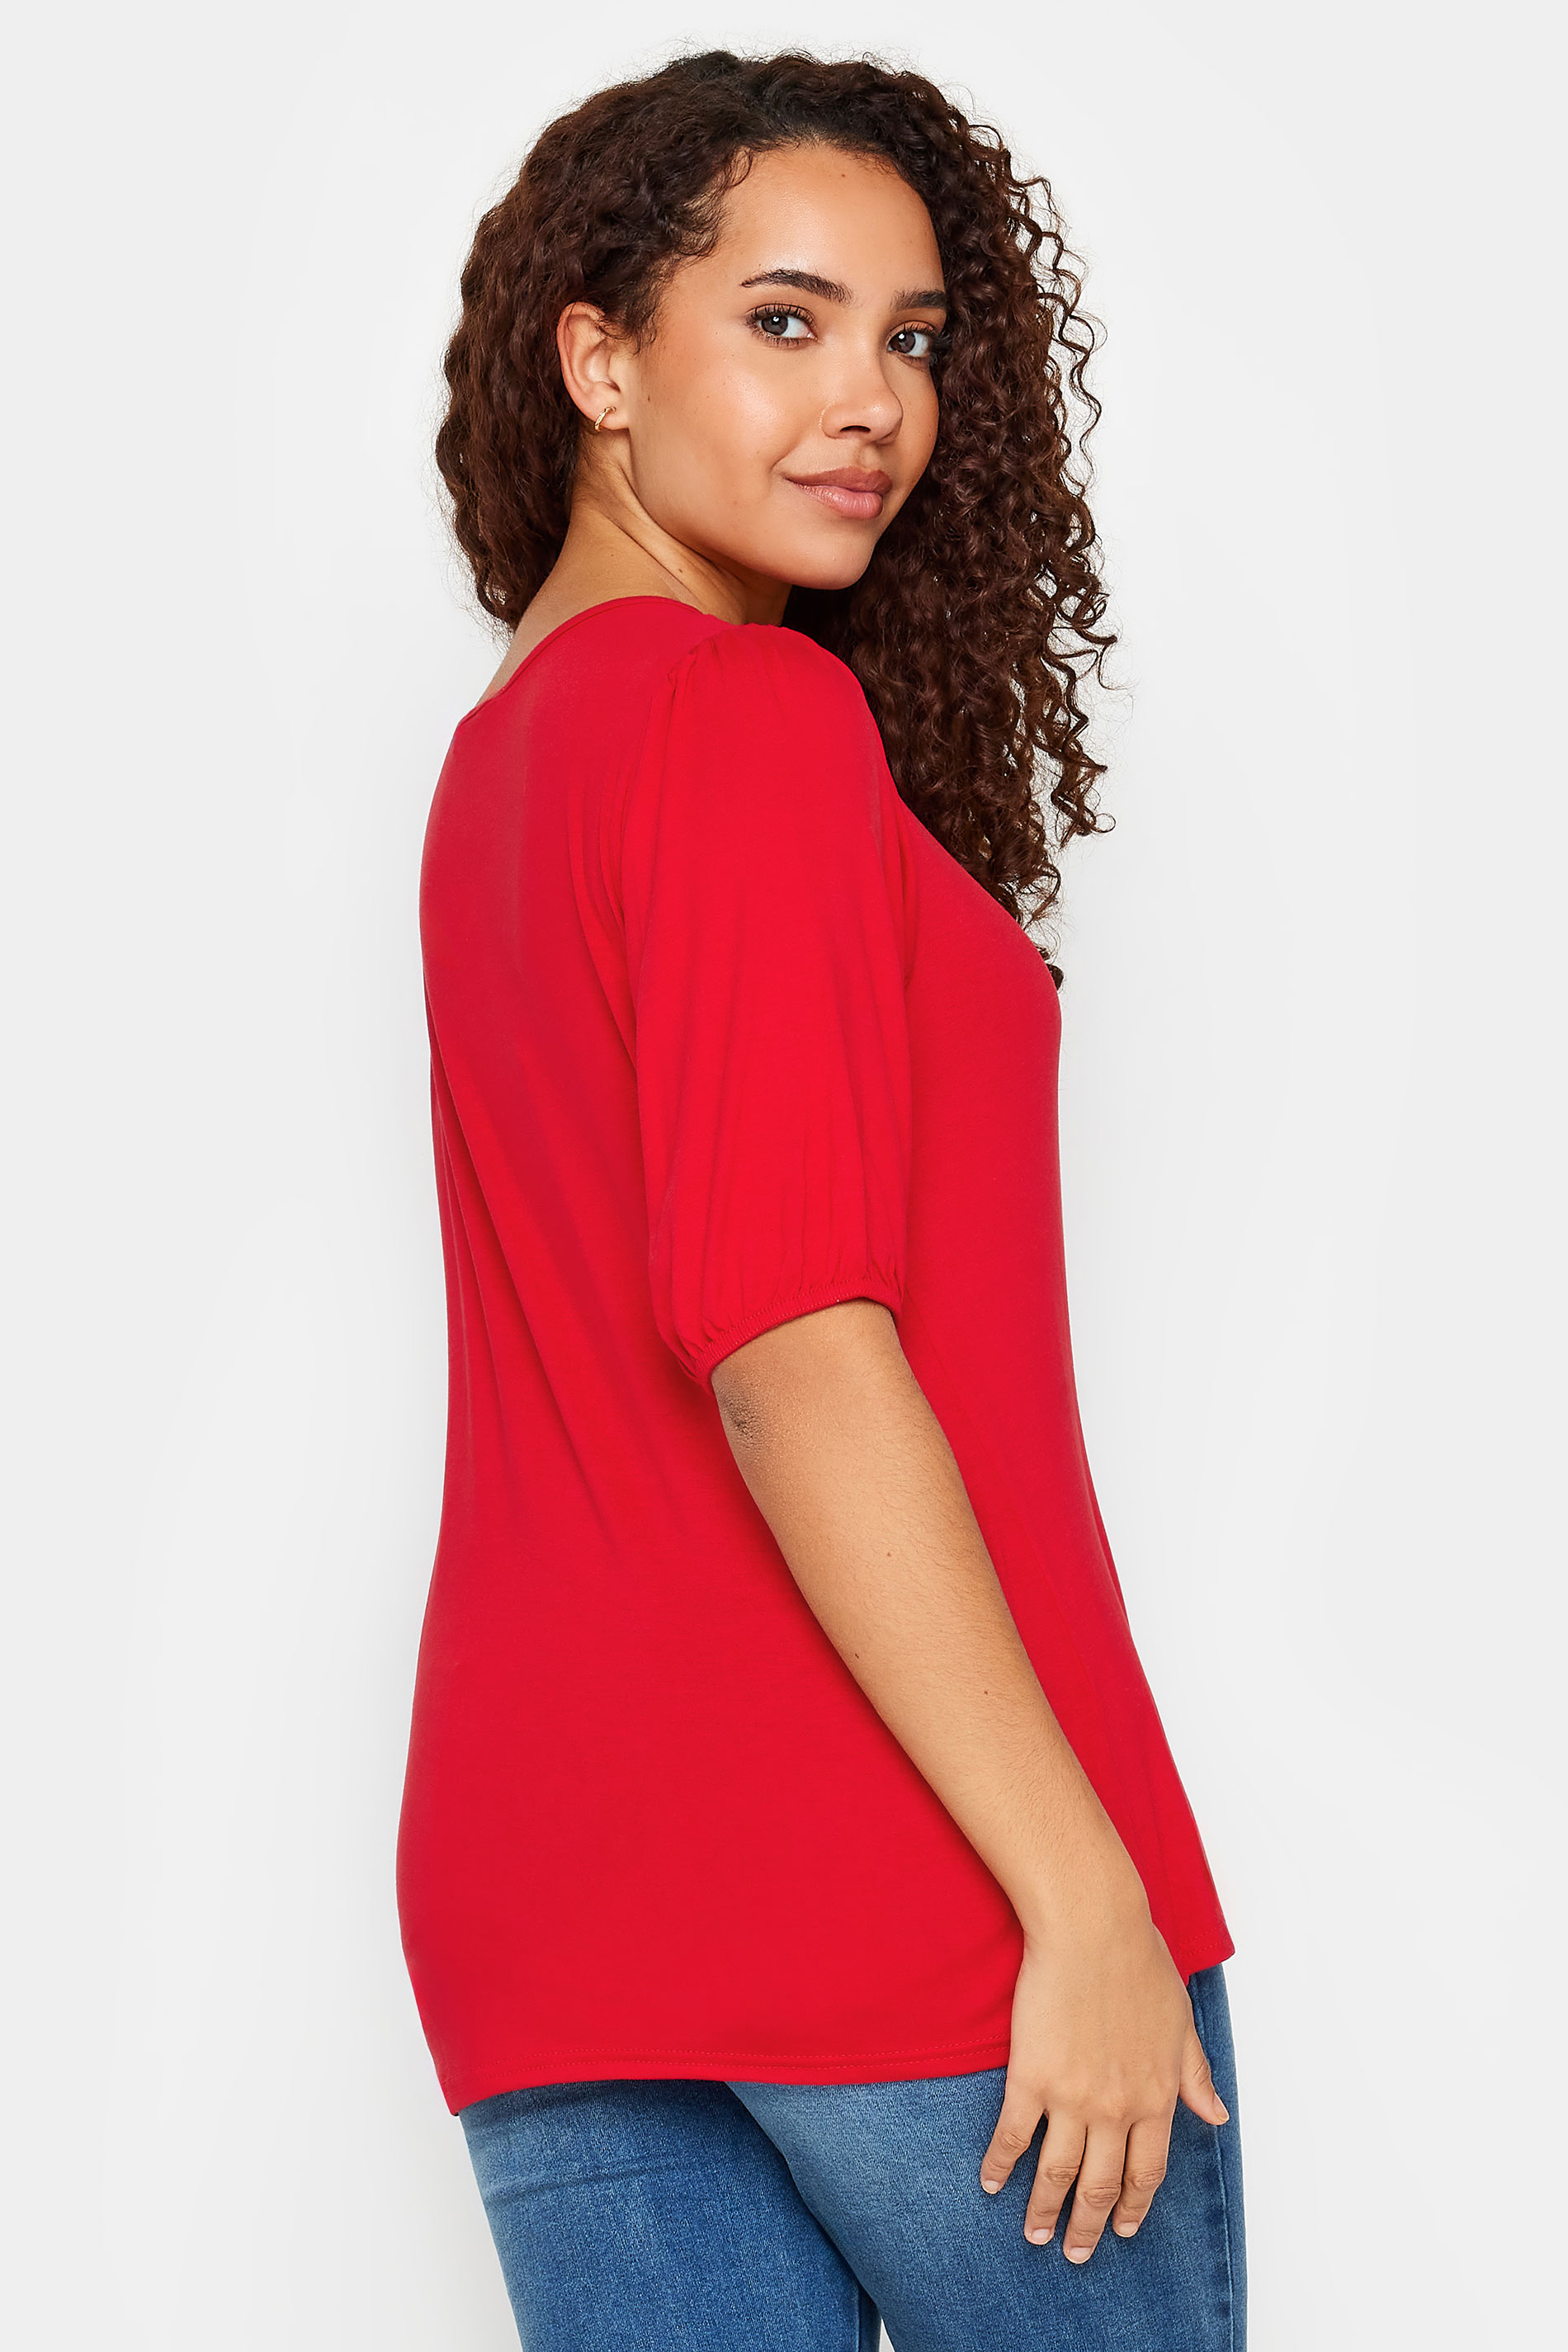 M&Co Red Balloon Sleeve Top | M&Co 3